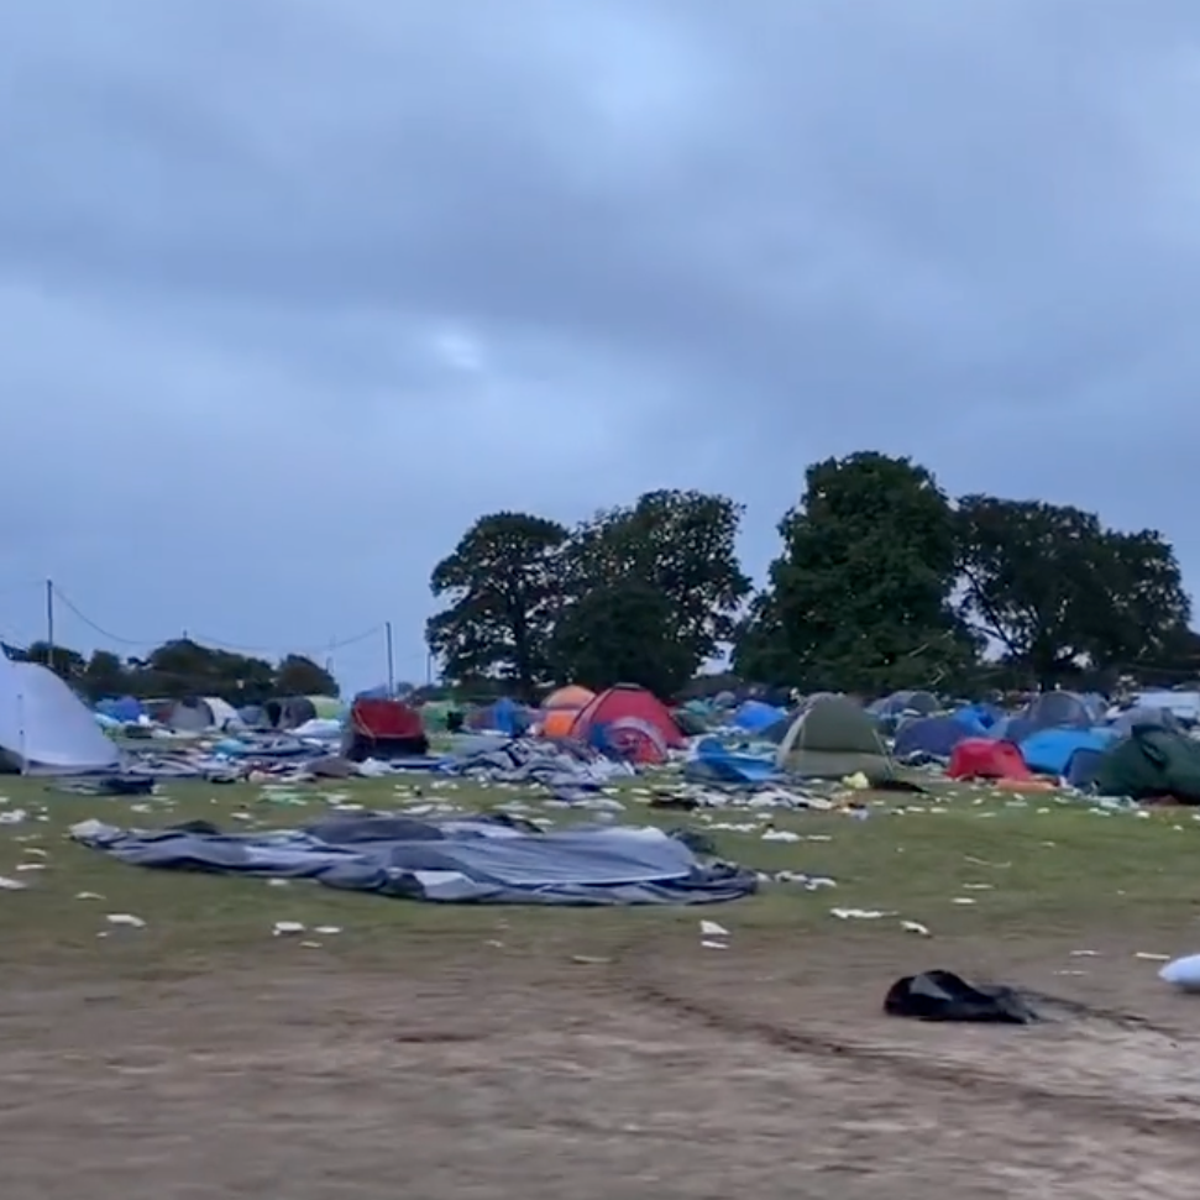 Leeds Festival clean-up crew share footage of 'appalling